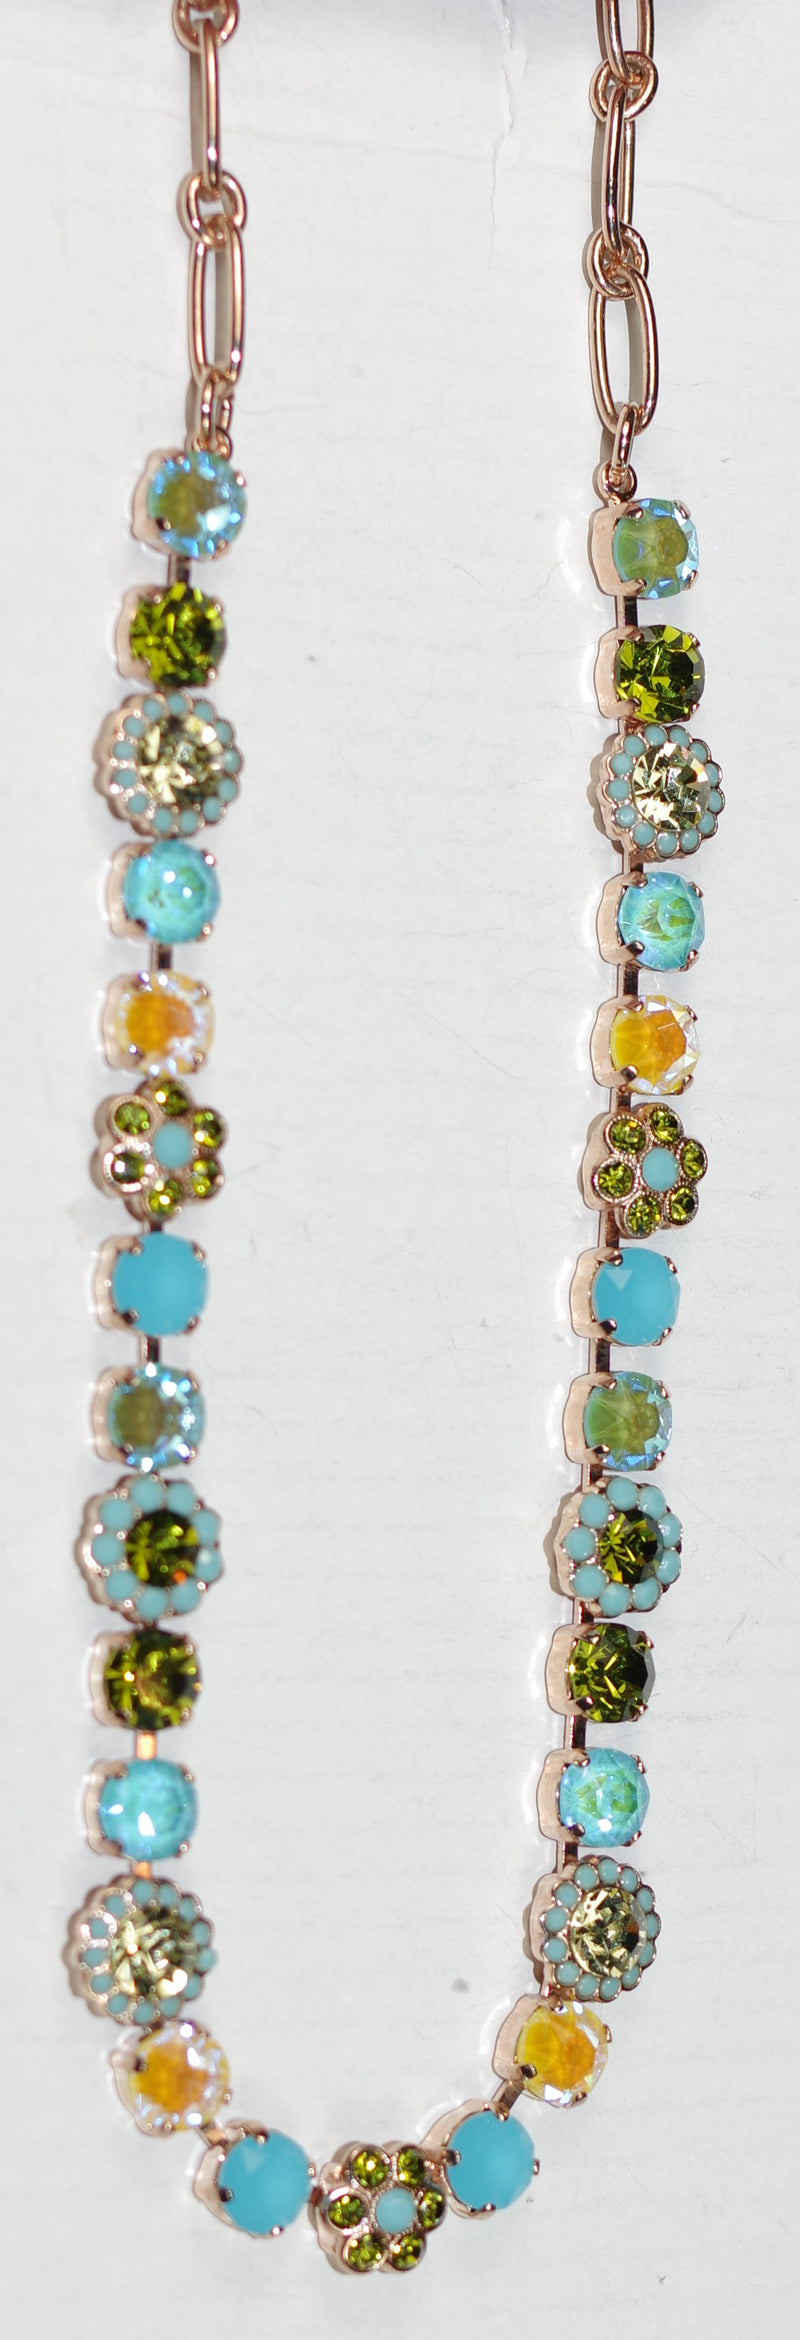 MARIANA NECKLACE PISTACHIO: blue, green, yellow stones in rose gold setting, 17" adjustable chain